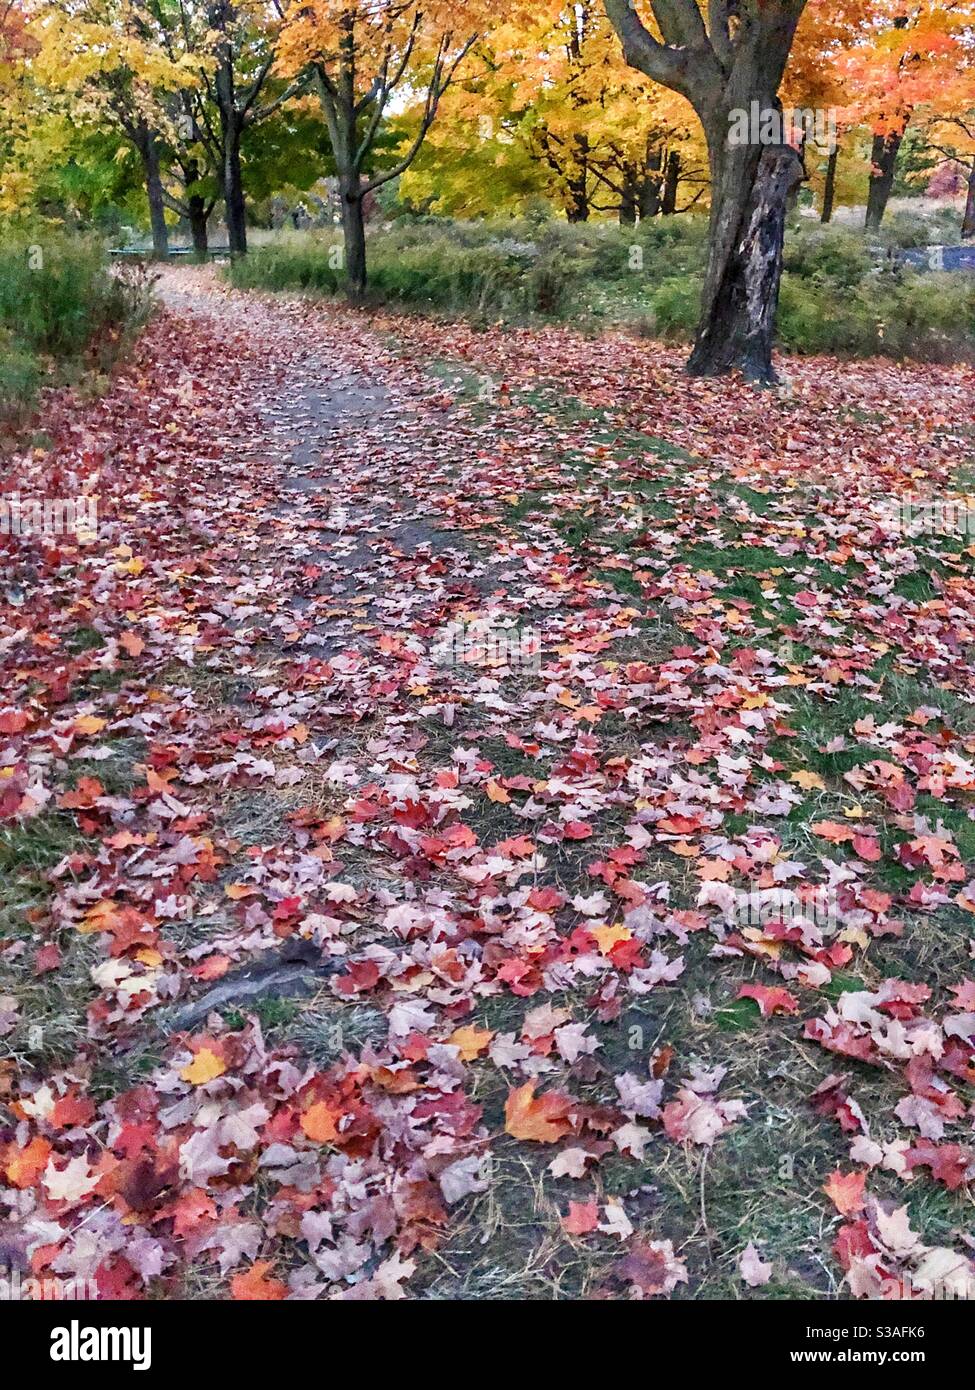 A carpet of autumn leaves. Stock Photo